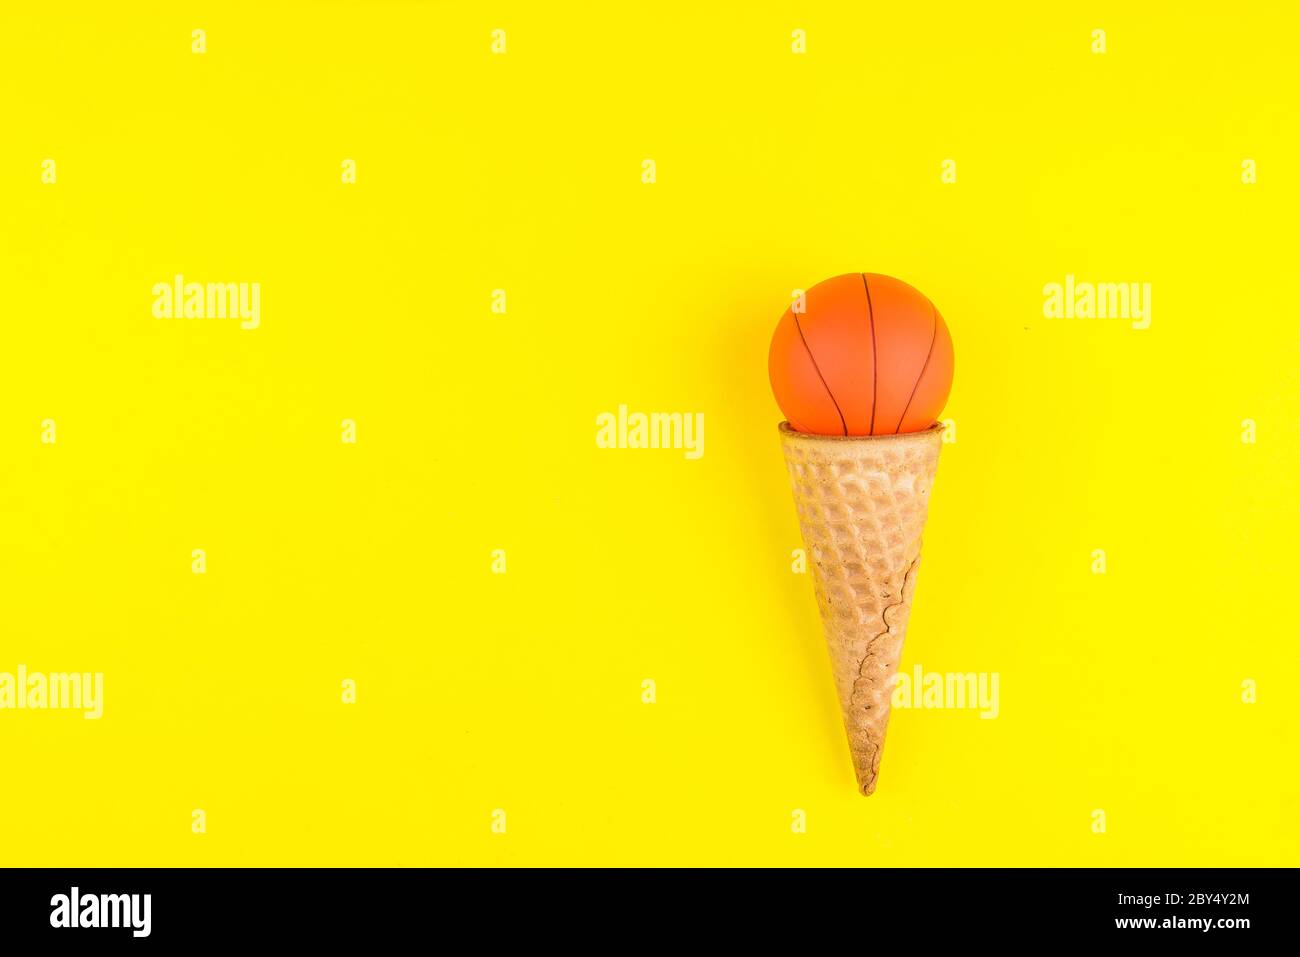 https://c8.alamy.com/comp/2BY4Y2M/basketball-ball-toy-in-ice-cream-waffle-cone-on-yellow-background-in-minimal-style-concept-sports-entertainment-top-view-copy-space-template-for-tex-2BY4Y2M.jpg